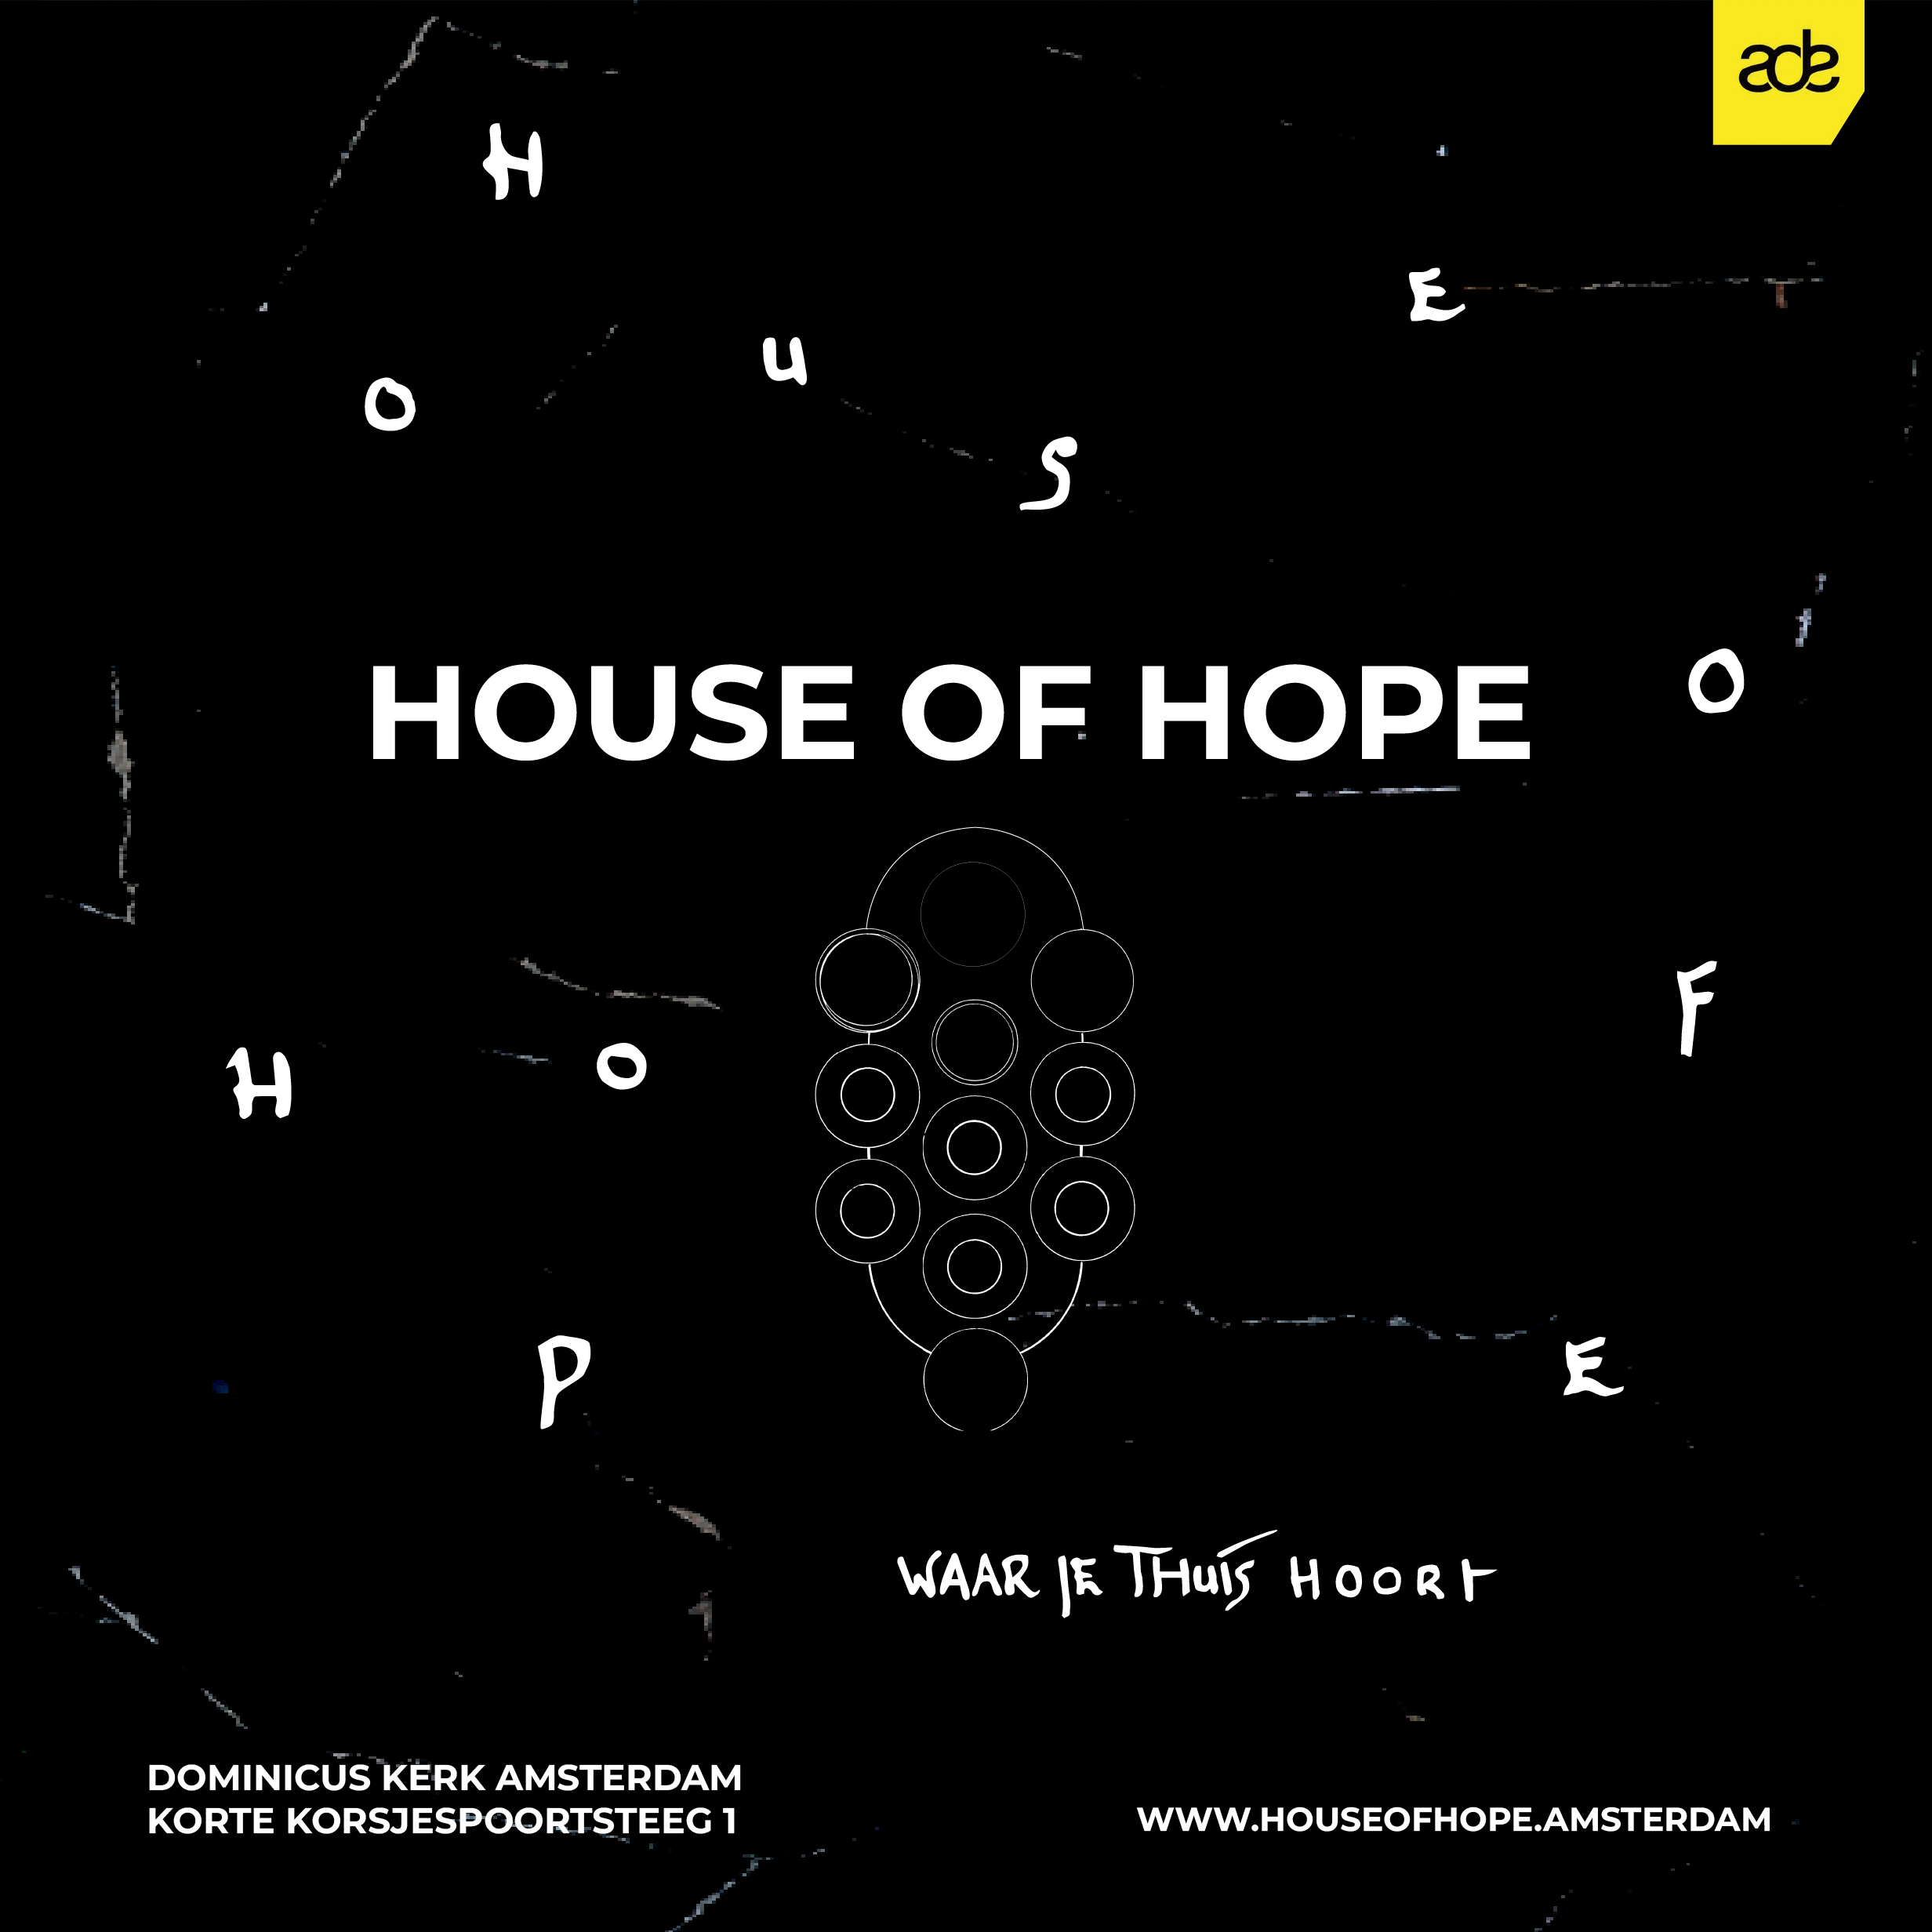 House of Hope - The street shows the way - ADE - フライヤー表